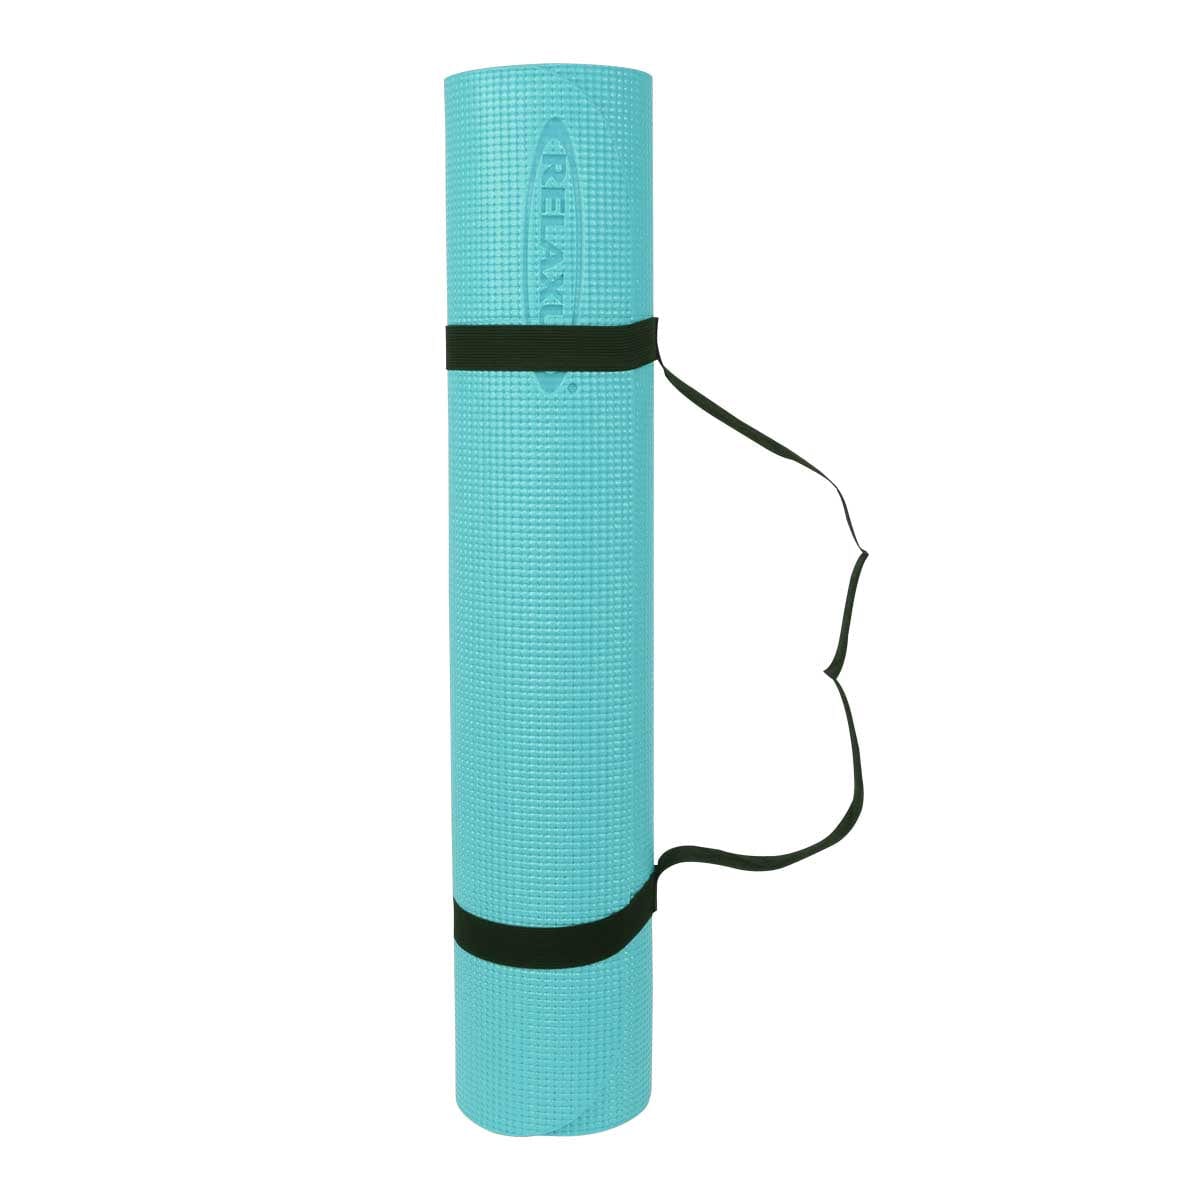 Shop Yoga Mats Online - Non Slips, Simple Alignment and More